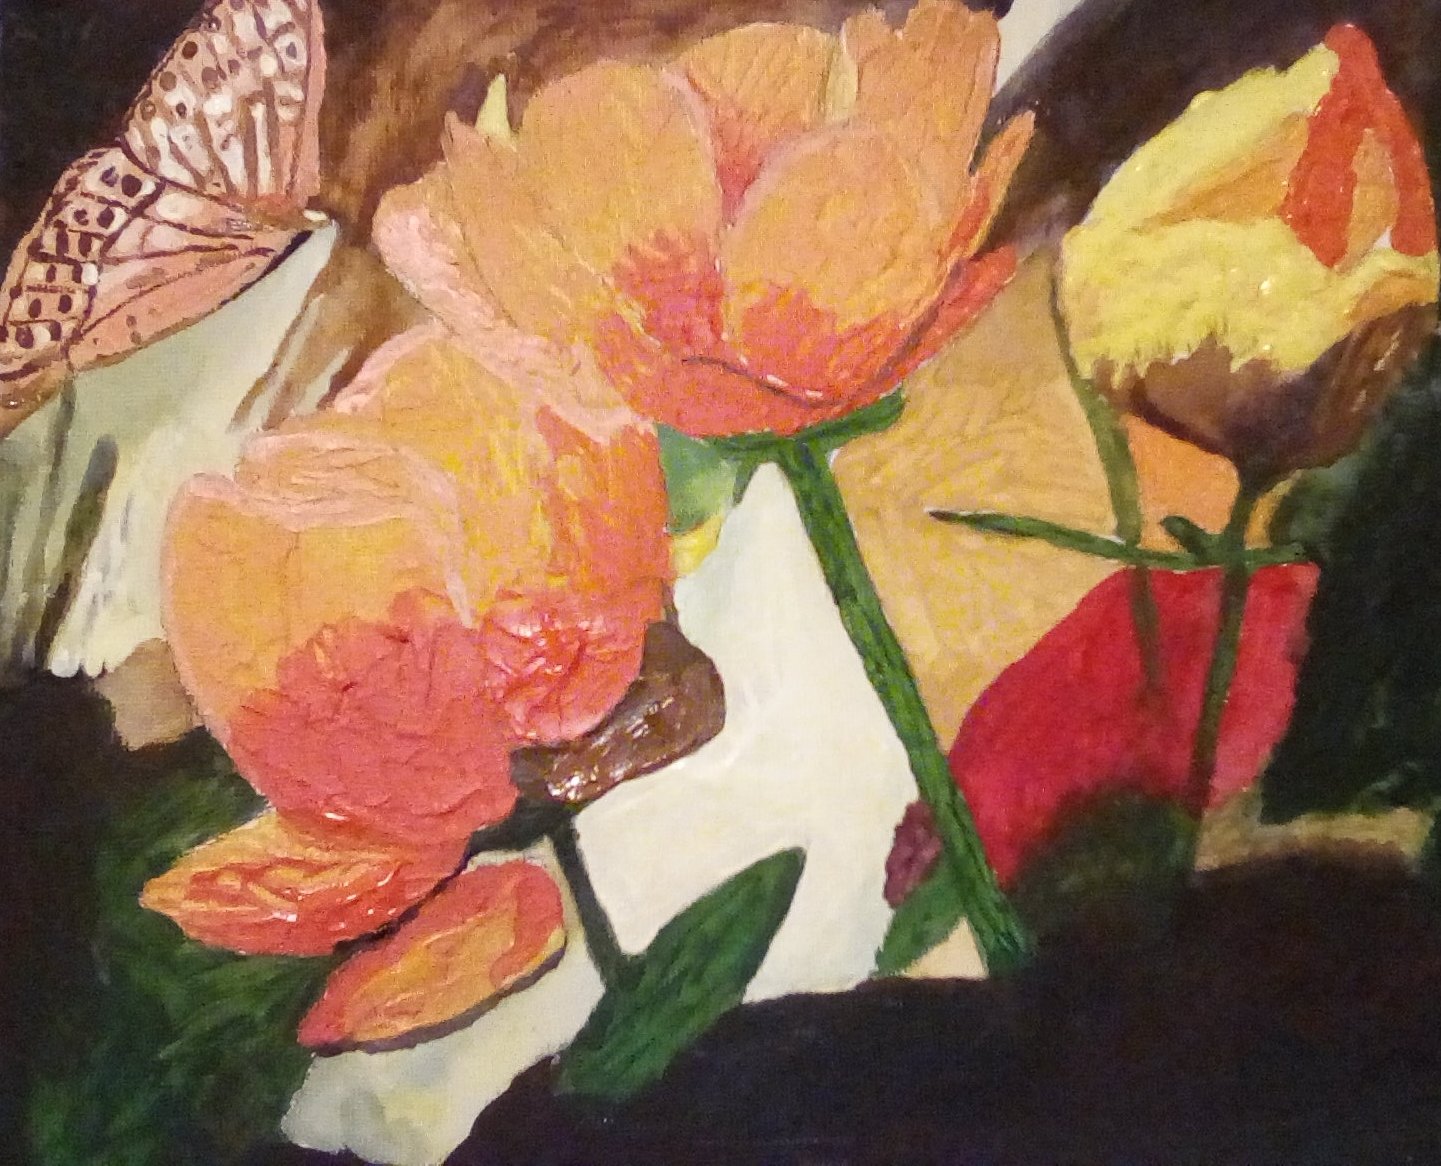 The finished painting of the flowers. 